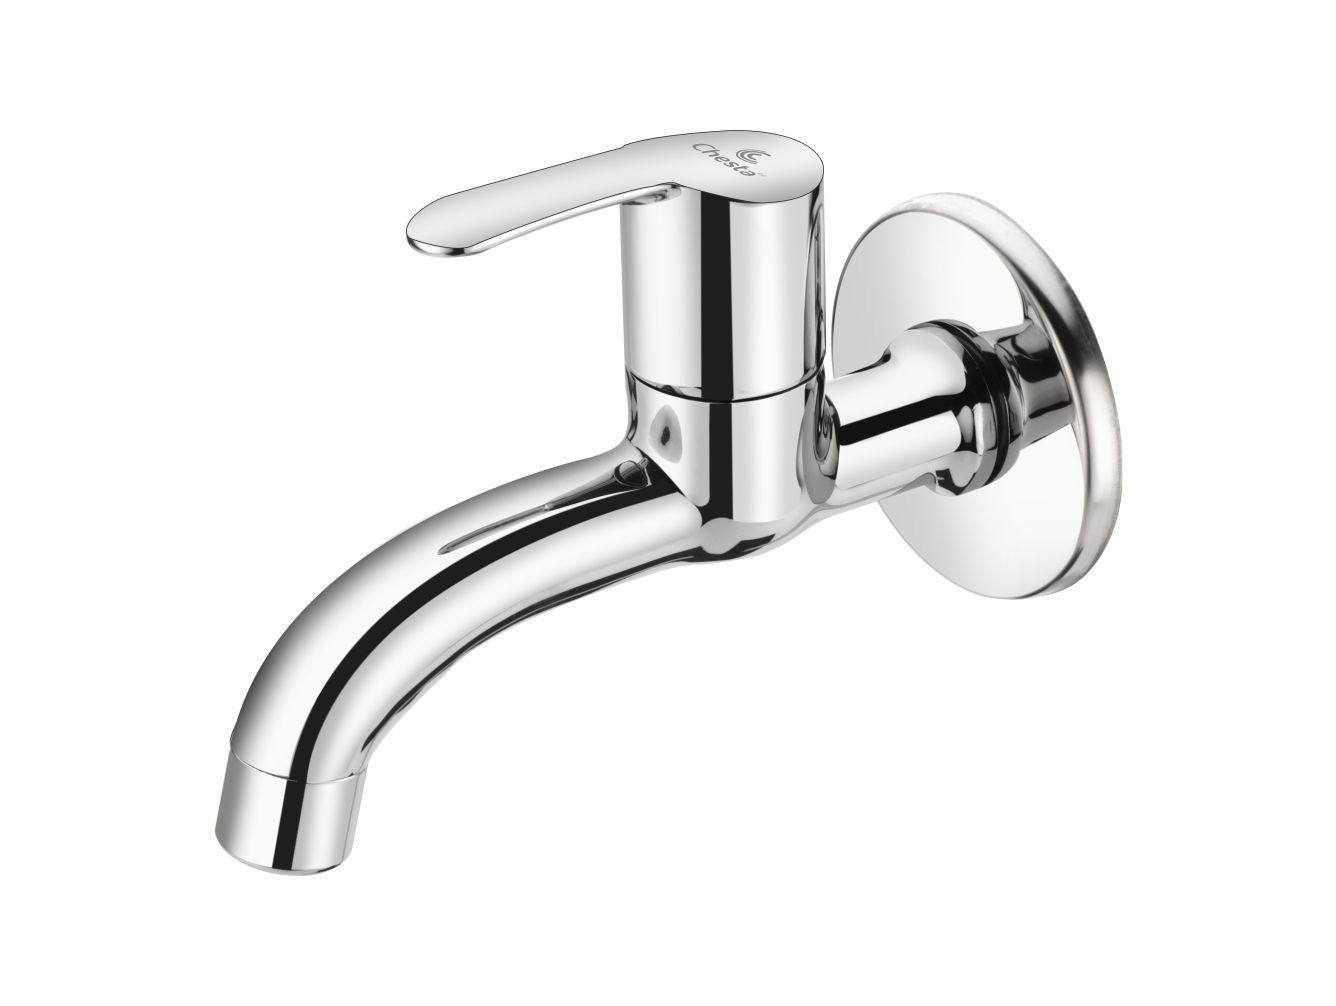 DR - 1002 - Long Body with Wall Flange Bath Fittings